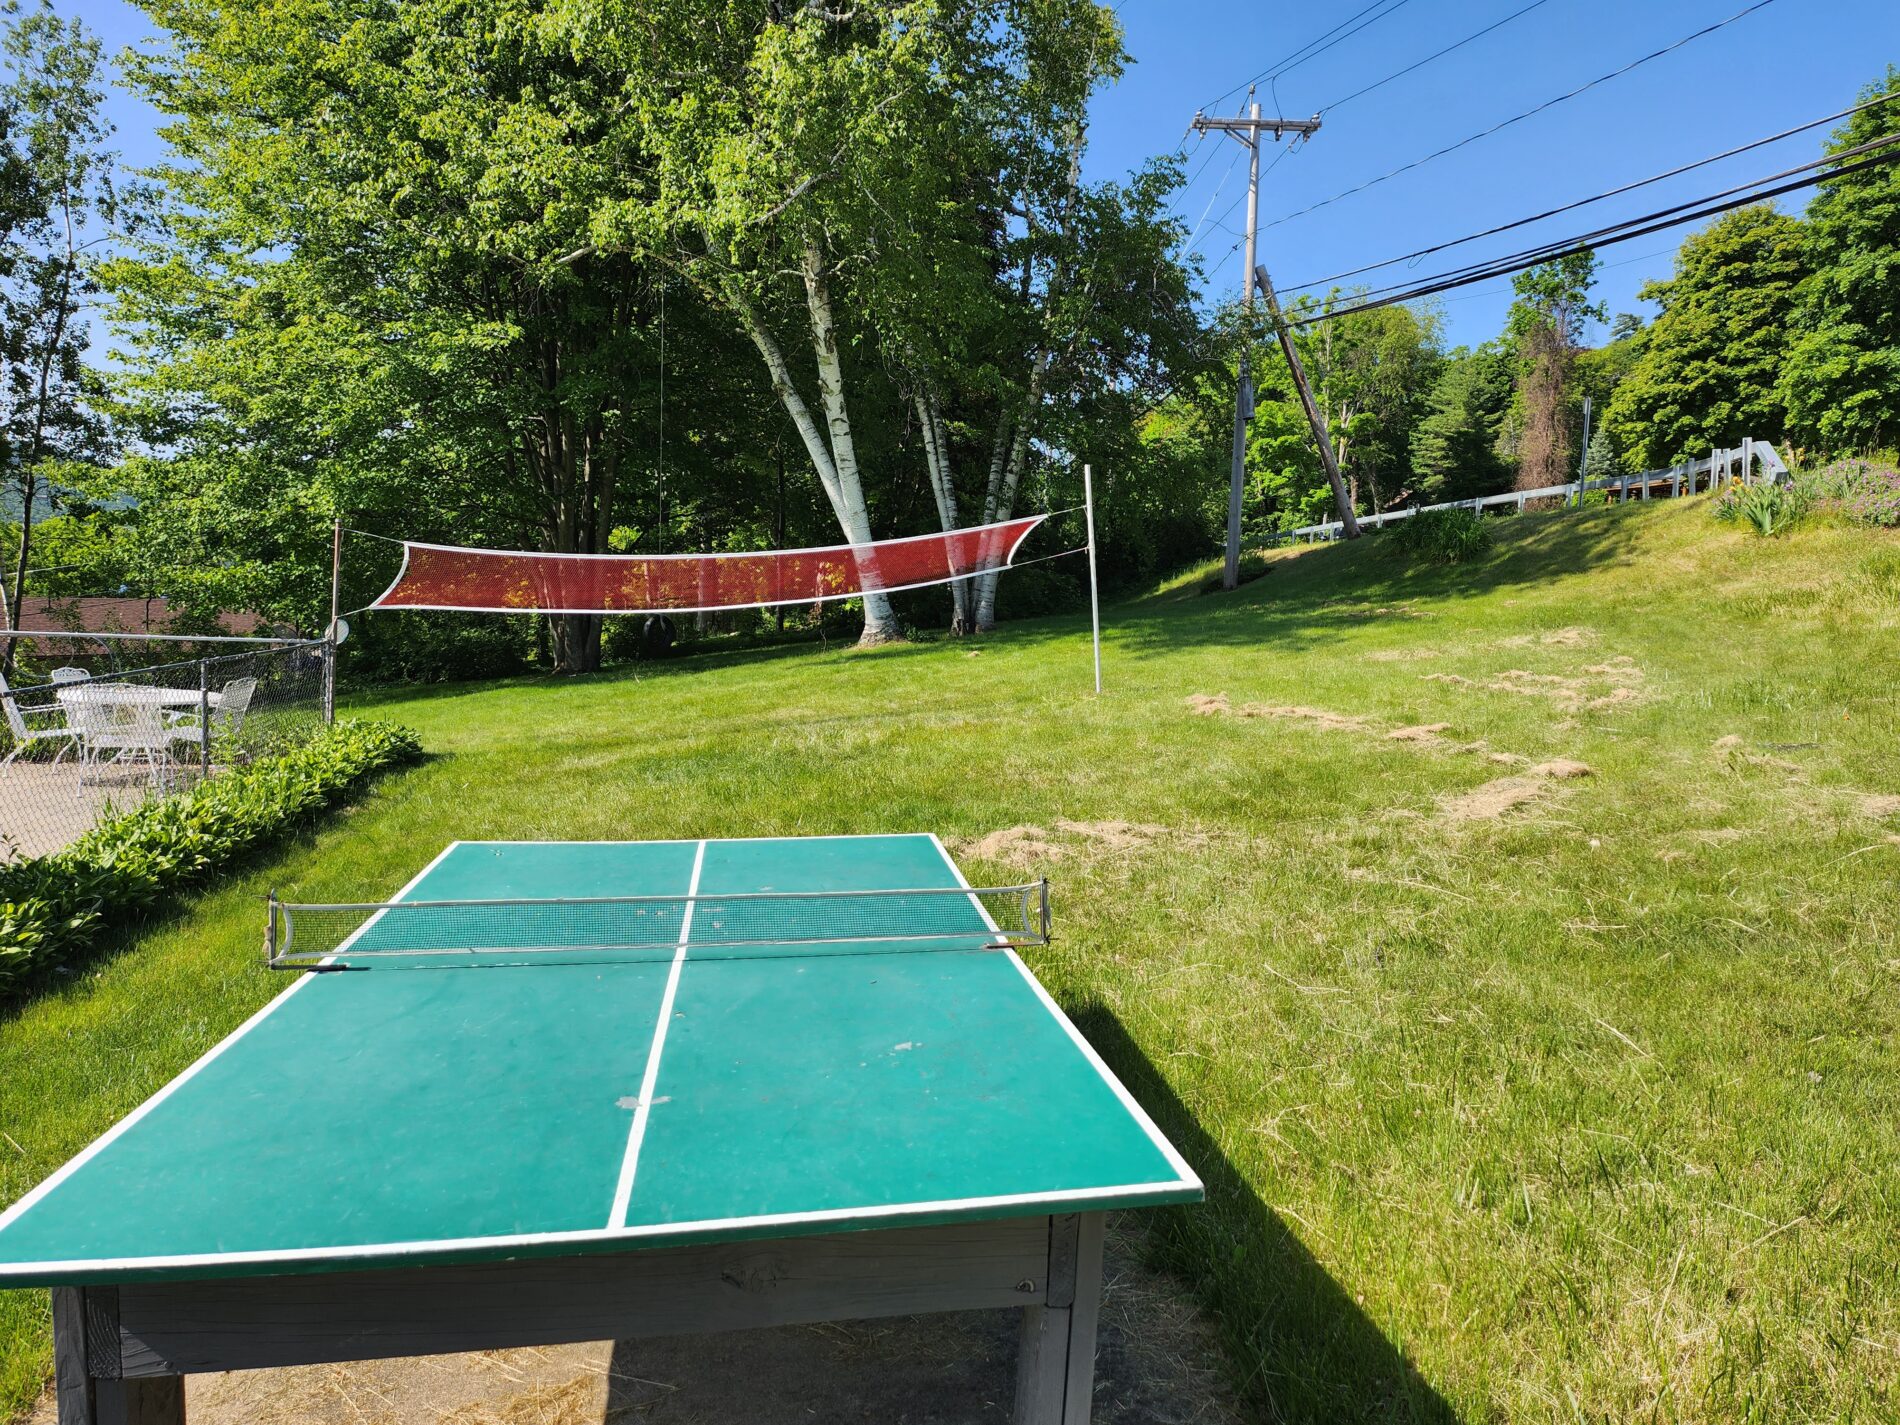 Ping pong table and volleyball net at Cramer's Point Lake Breeze resort in Lake George NY